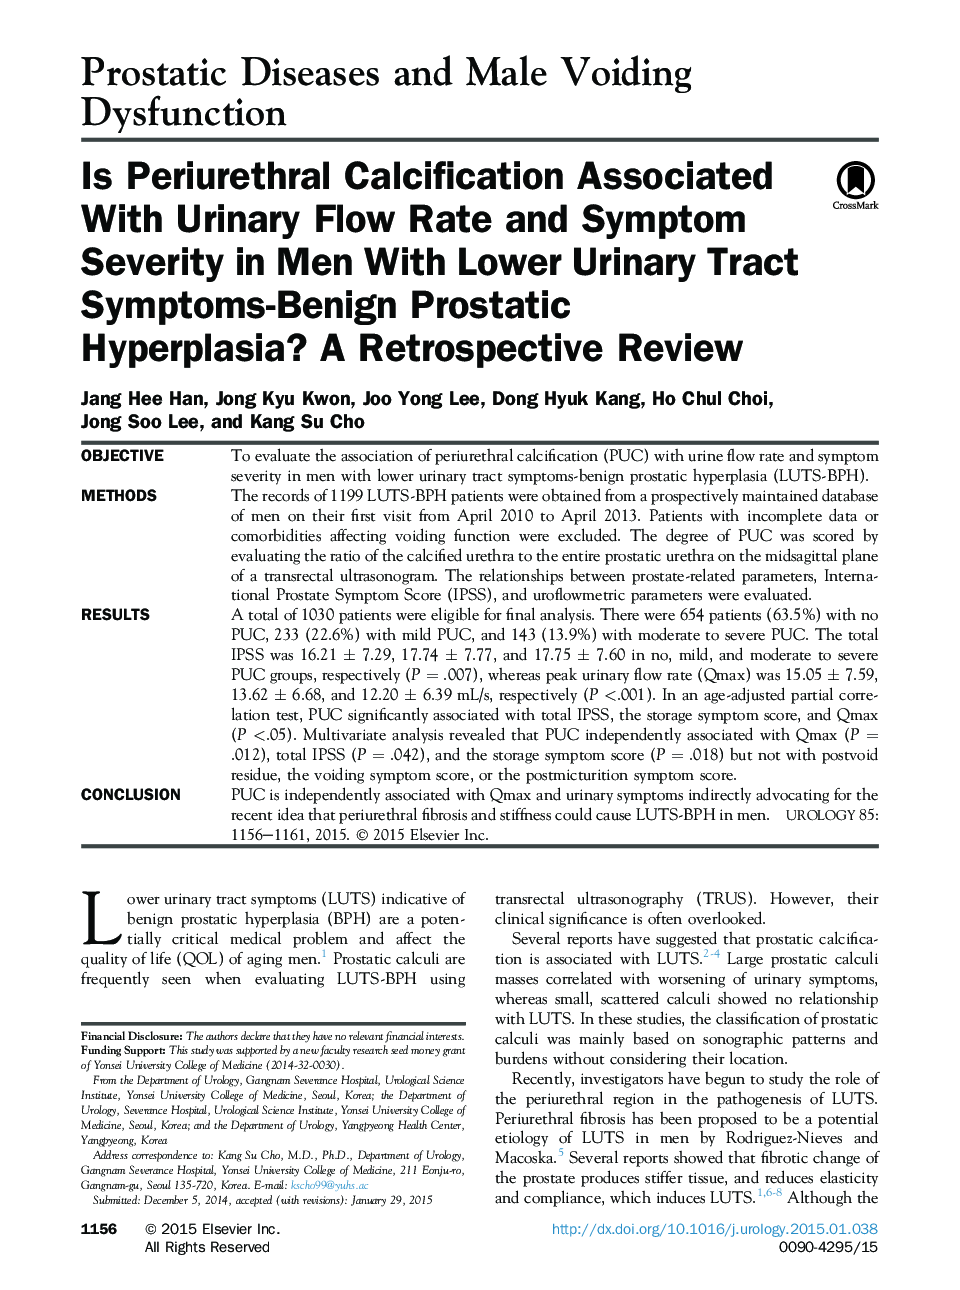 Is Periurethral Calcification Associated With Urinary Flow Rate and Symptom Severity in Men With Lower Urinary Tract Symptoms-Benign Prostatic Hyperplasia? A Retrospective Review 